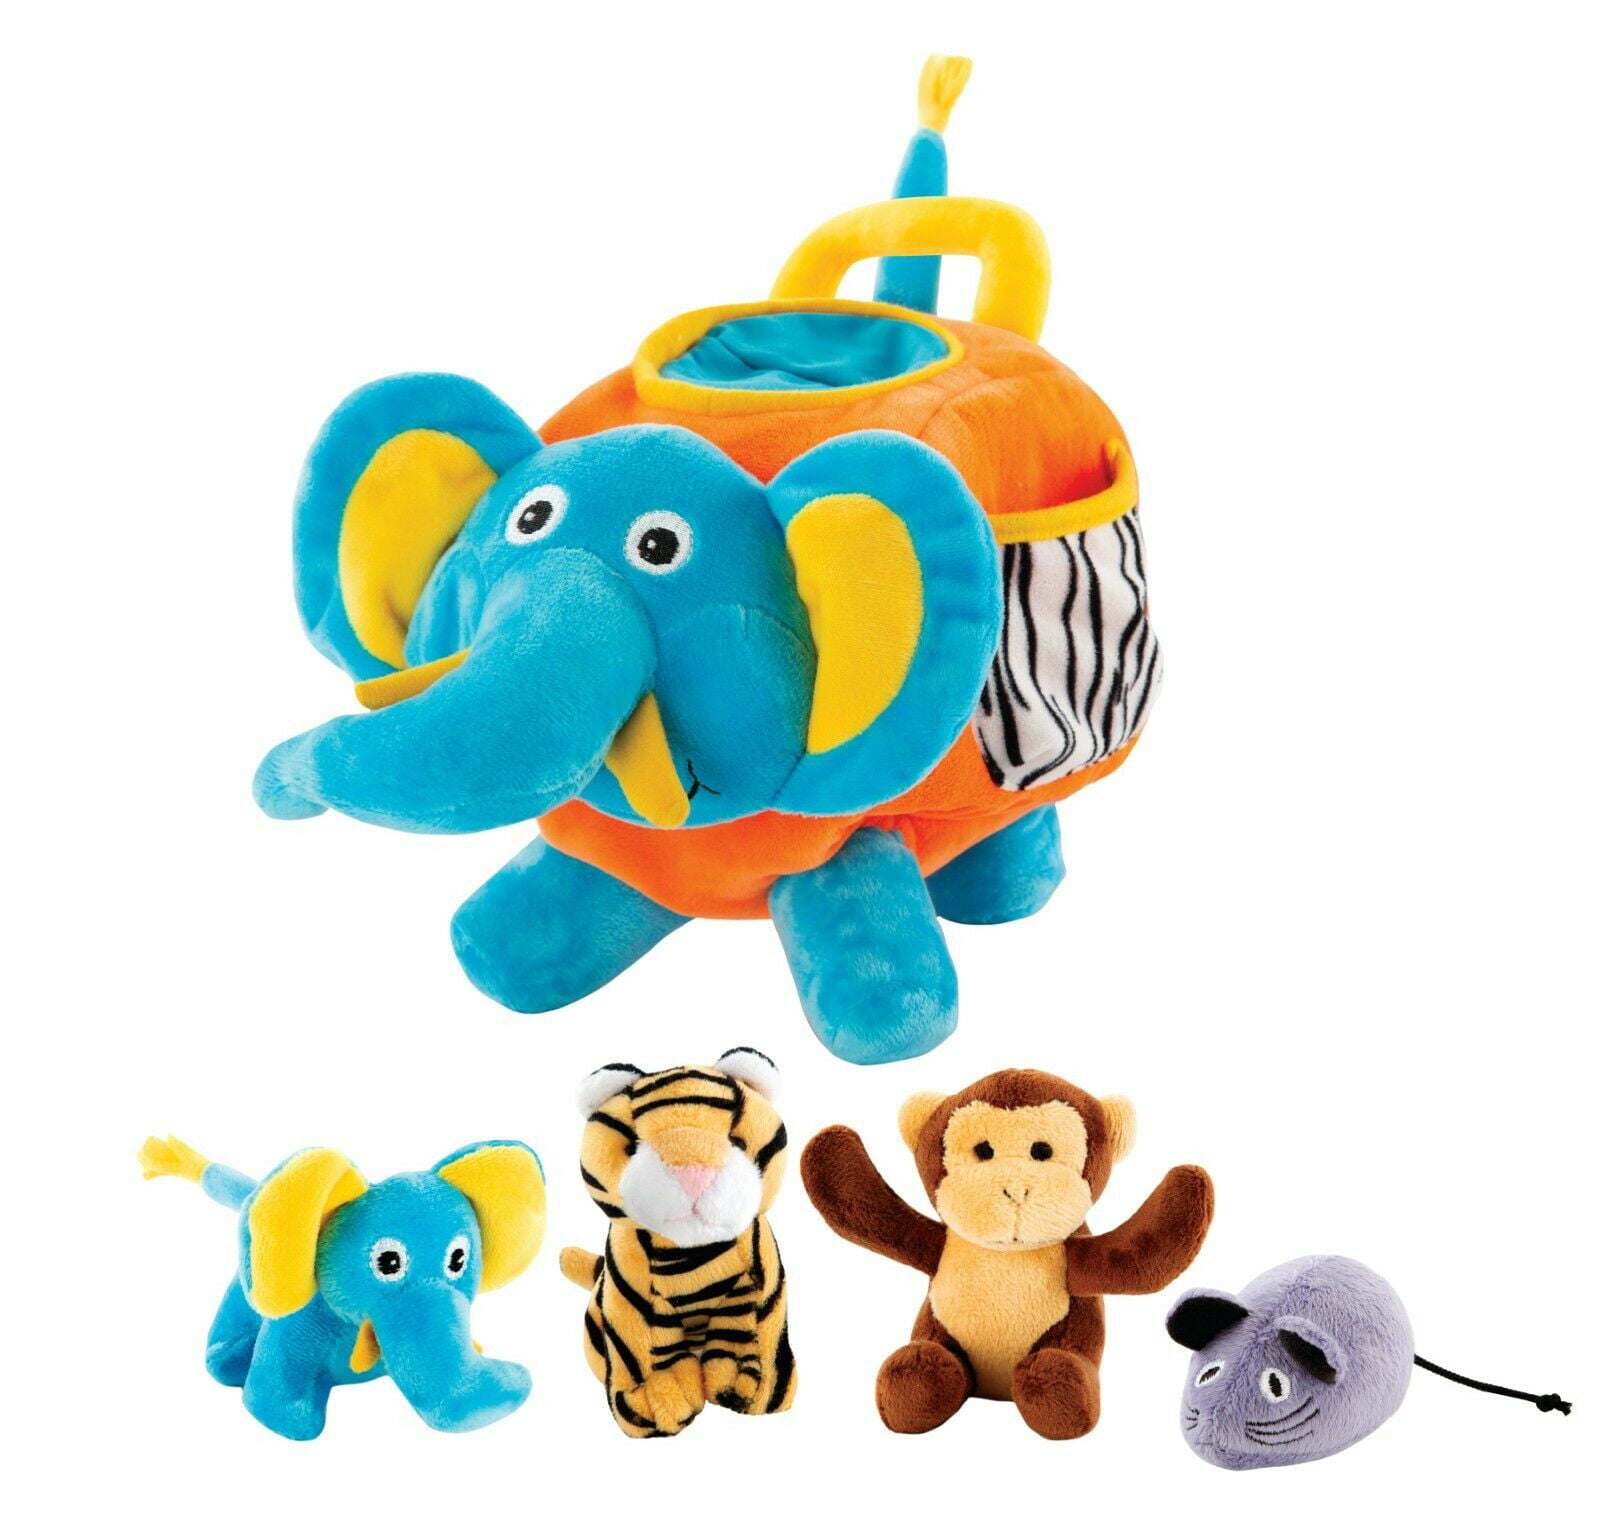 Tiger & Elephant 5 Pcs - Plays Real Sounds Gift for 1 Year Old Educational Plush Toy Talking Animal Set Giraffe with Carrier for Kids Great Baby Shower Gift Safari Animals Stuffed Monkey 